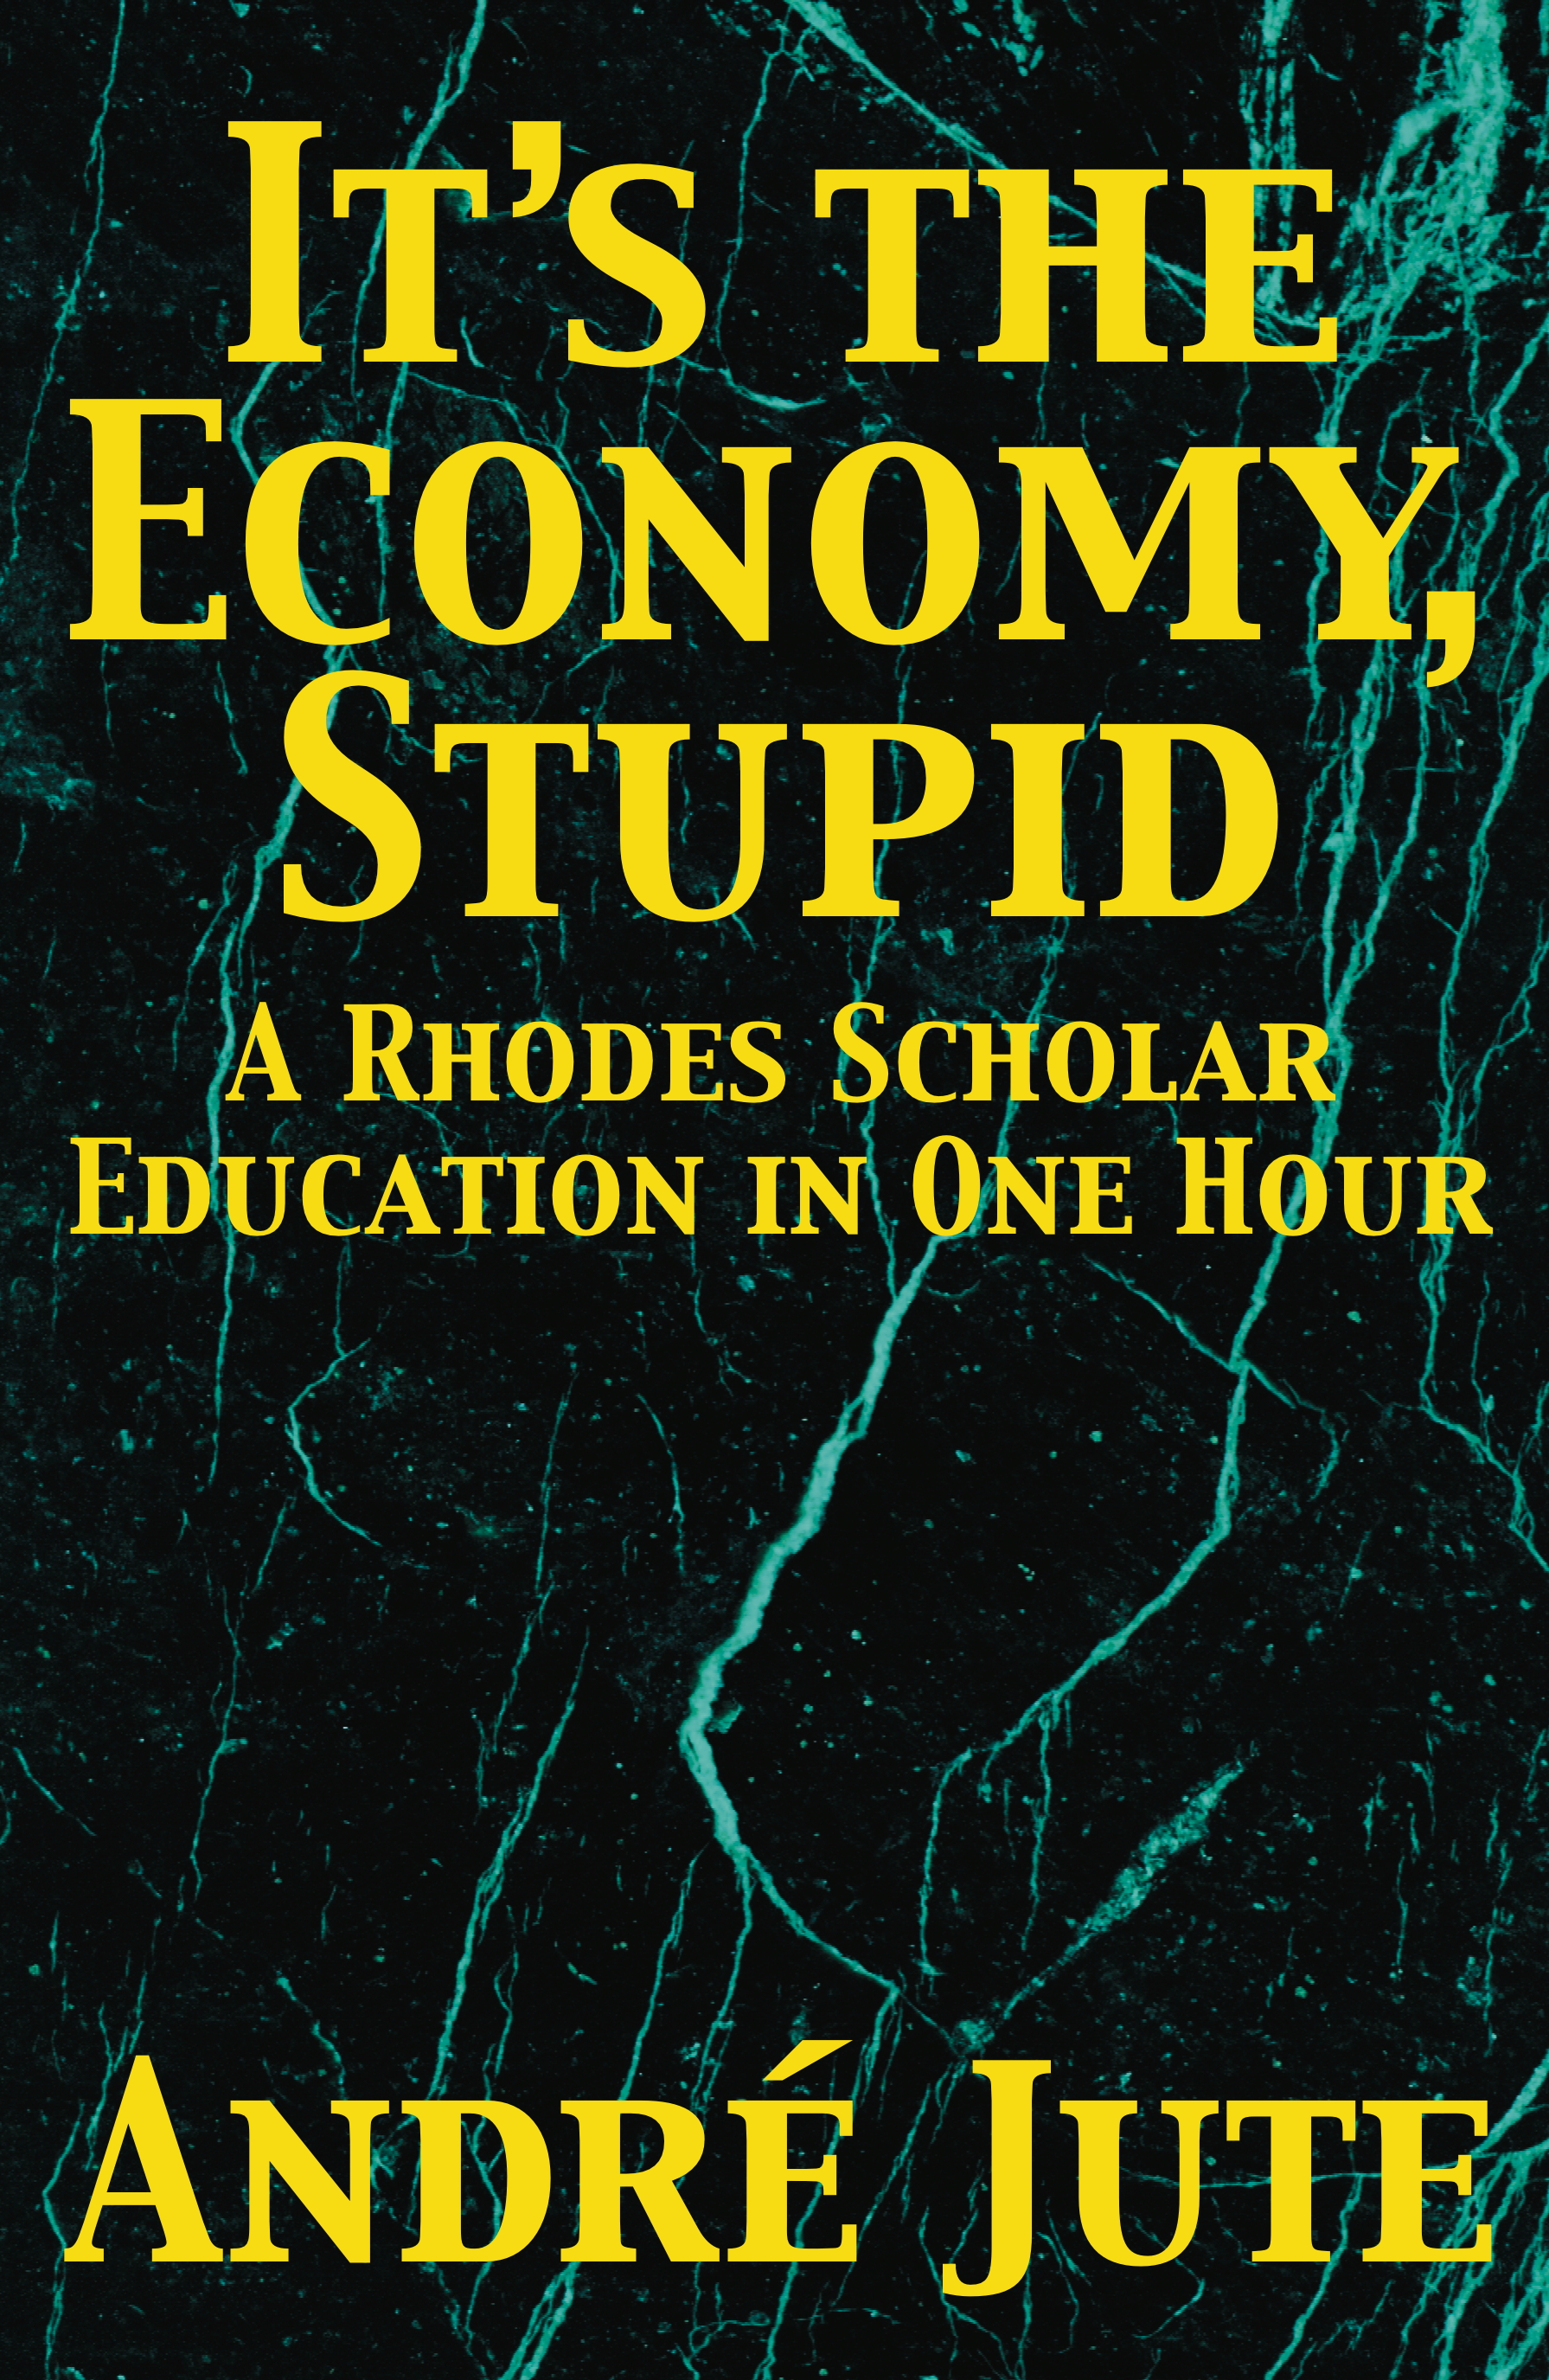 IT'S THE ECONOMY STUPID by Andre Jute